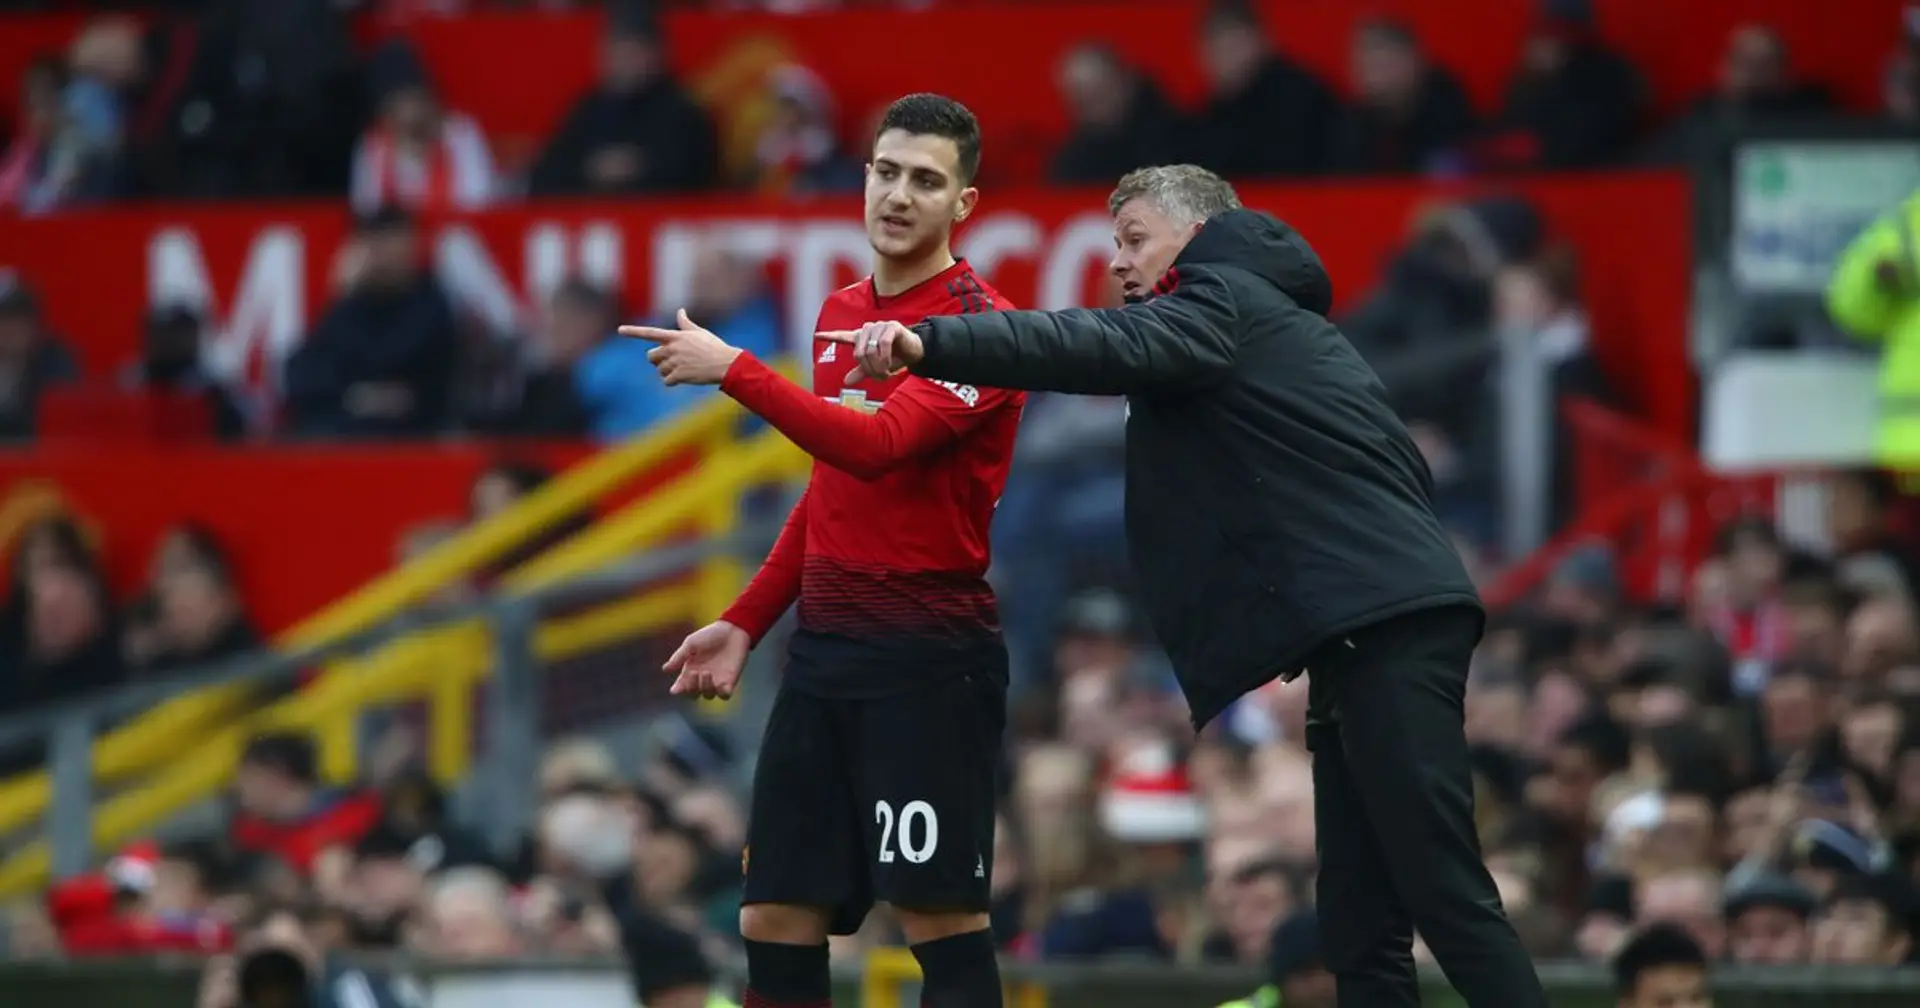 The curious case of Diogo: 5 possible reasons why Ole has frozen Dalot out